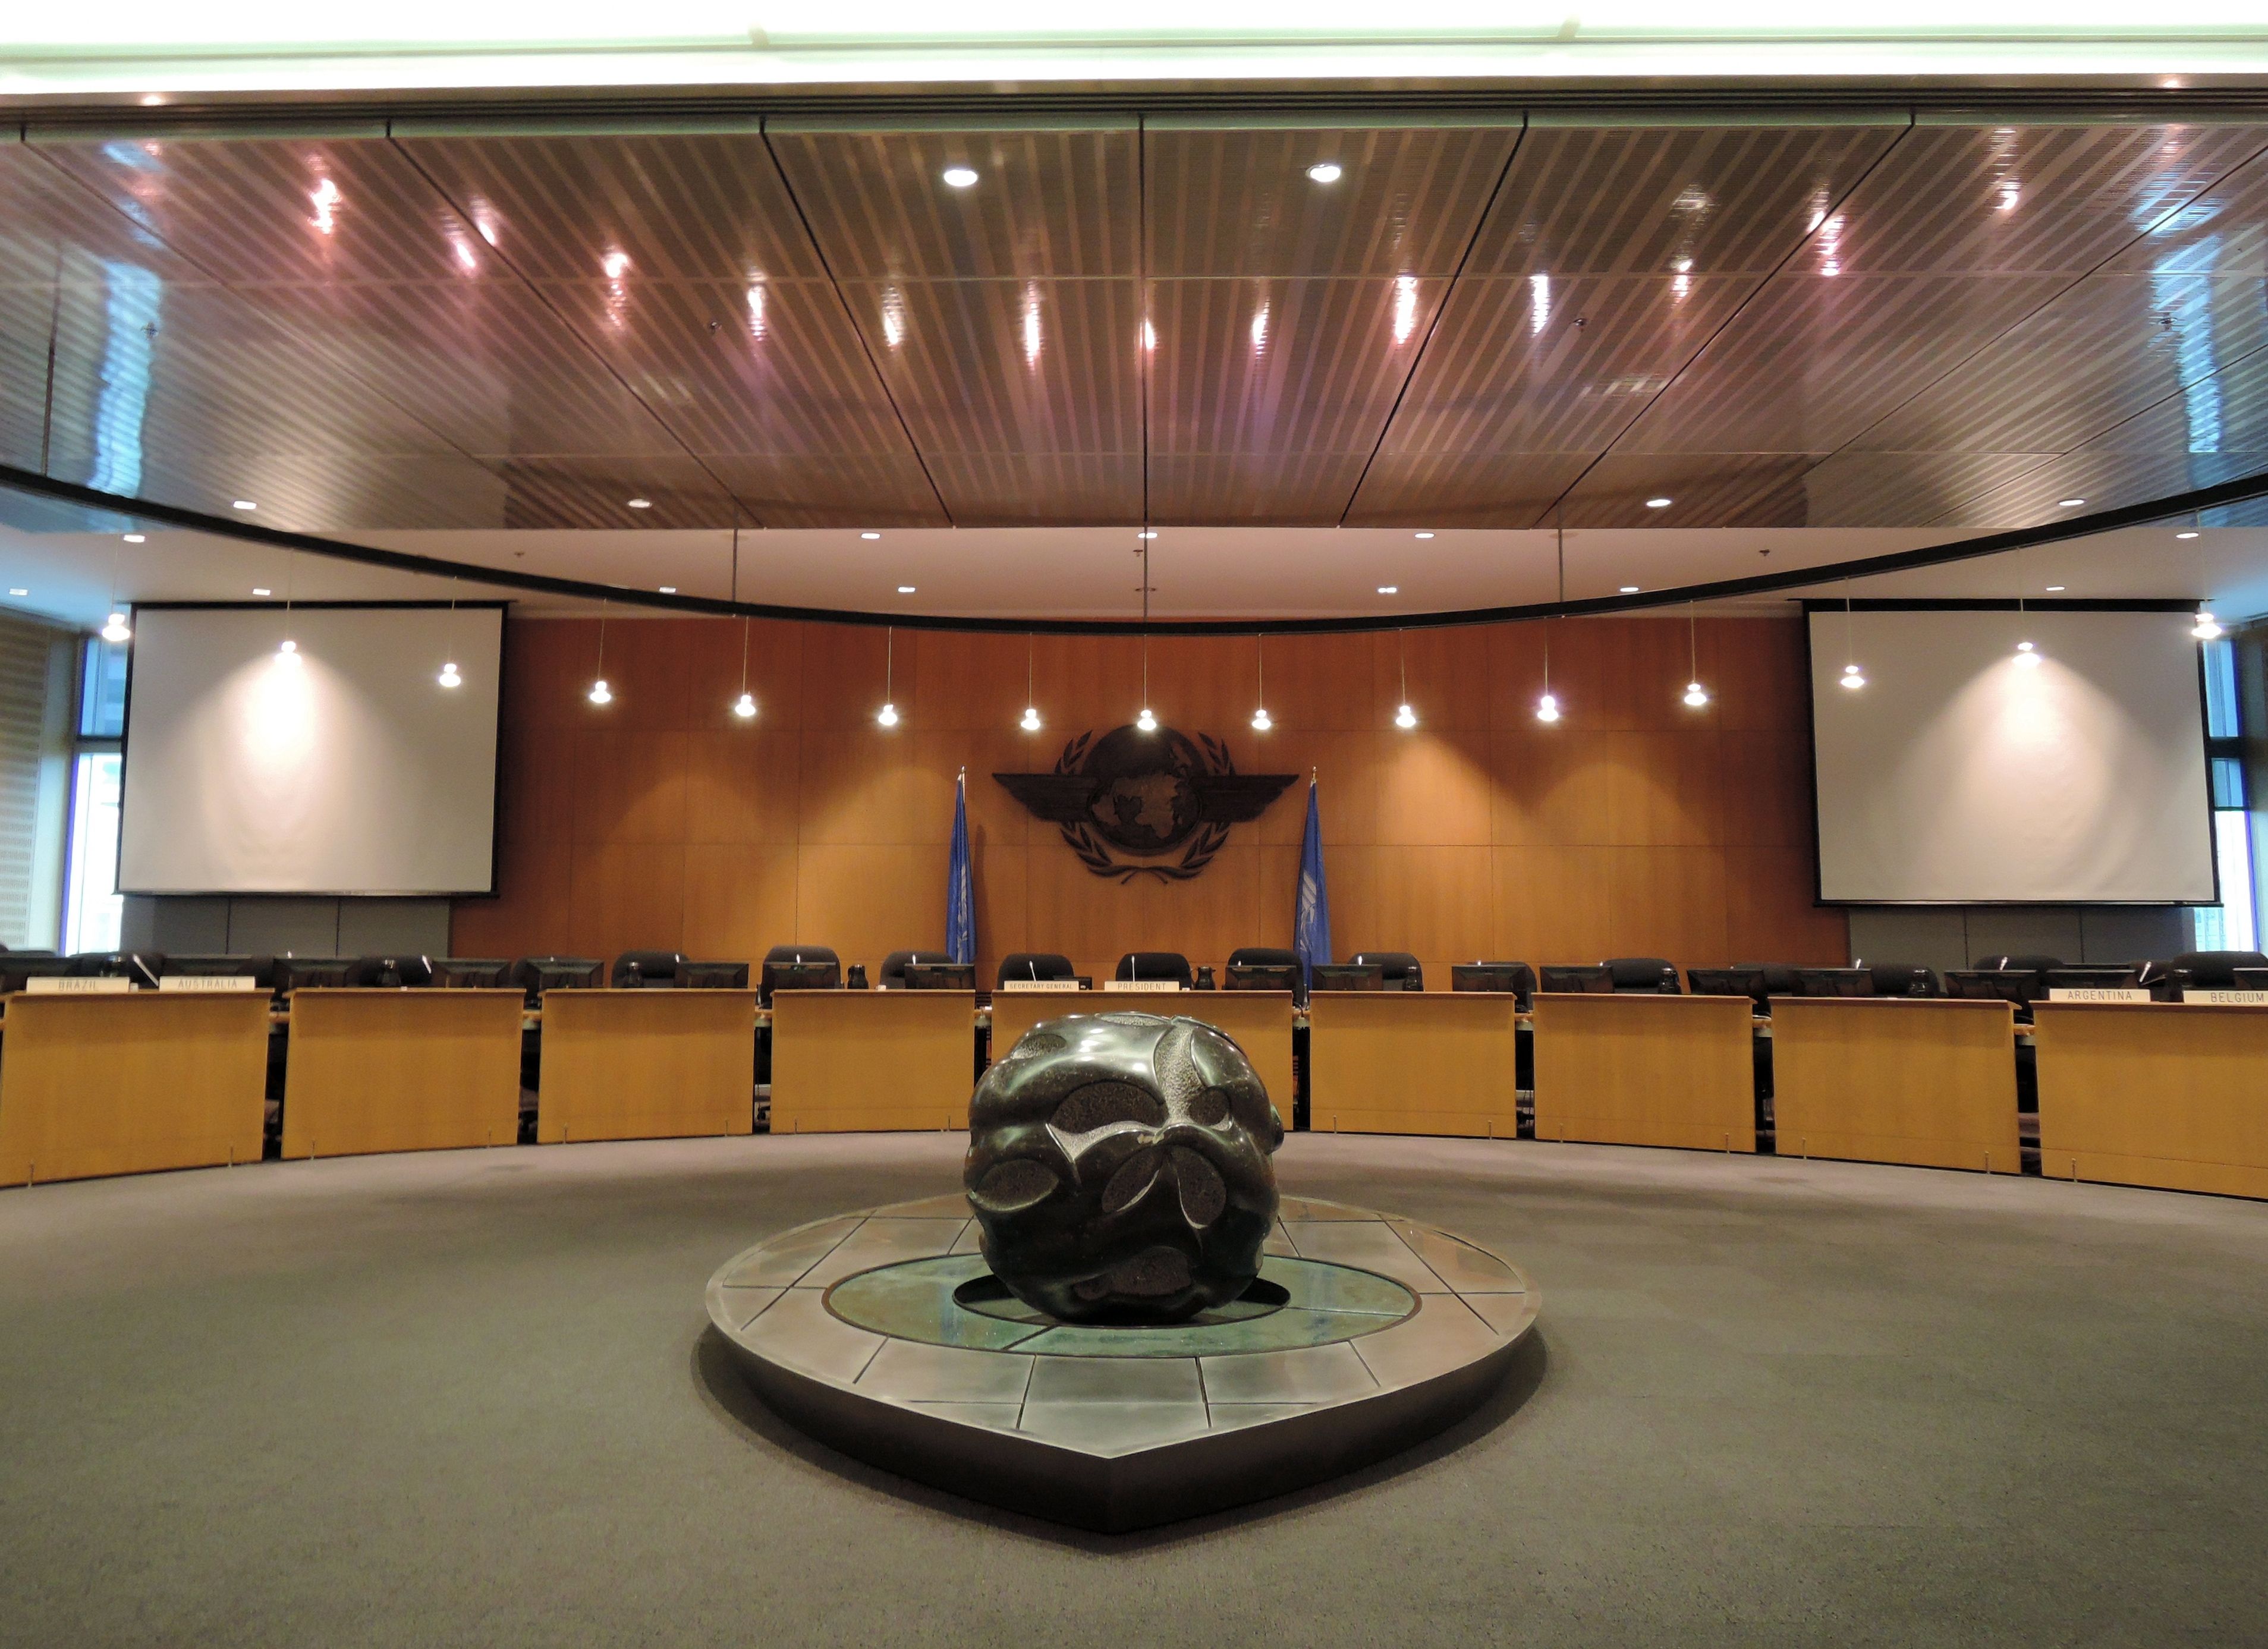 Inside the ICAO meeting chamber.